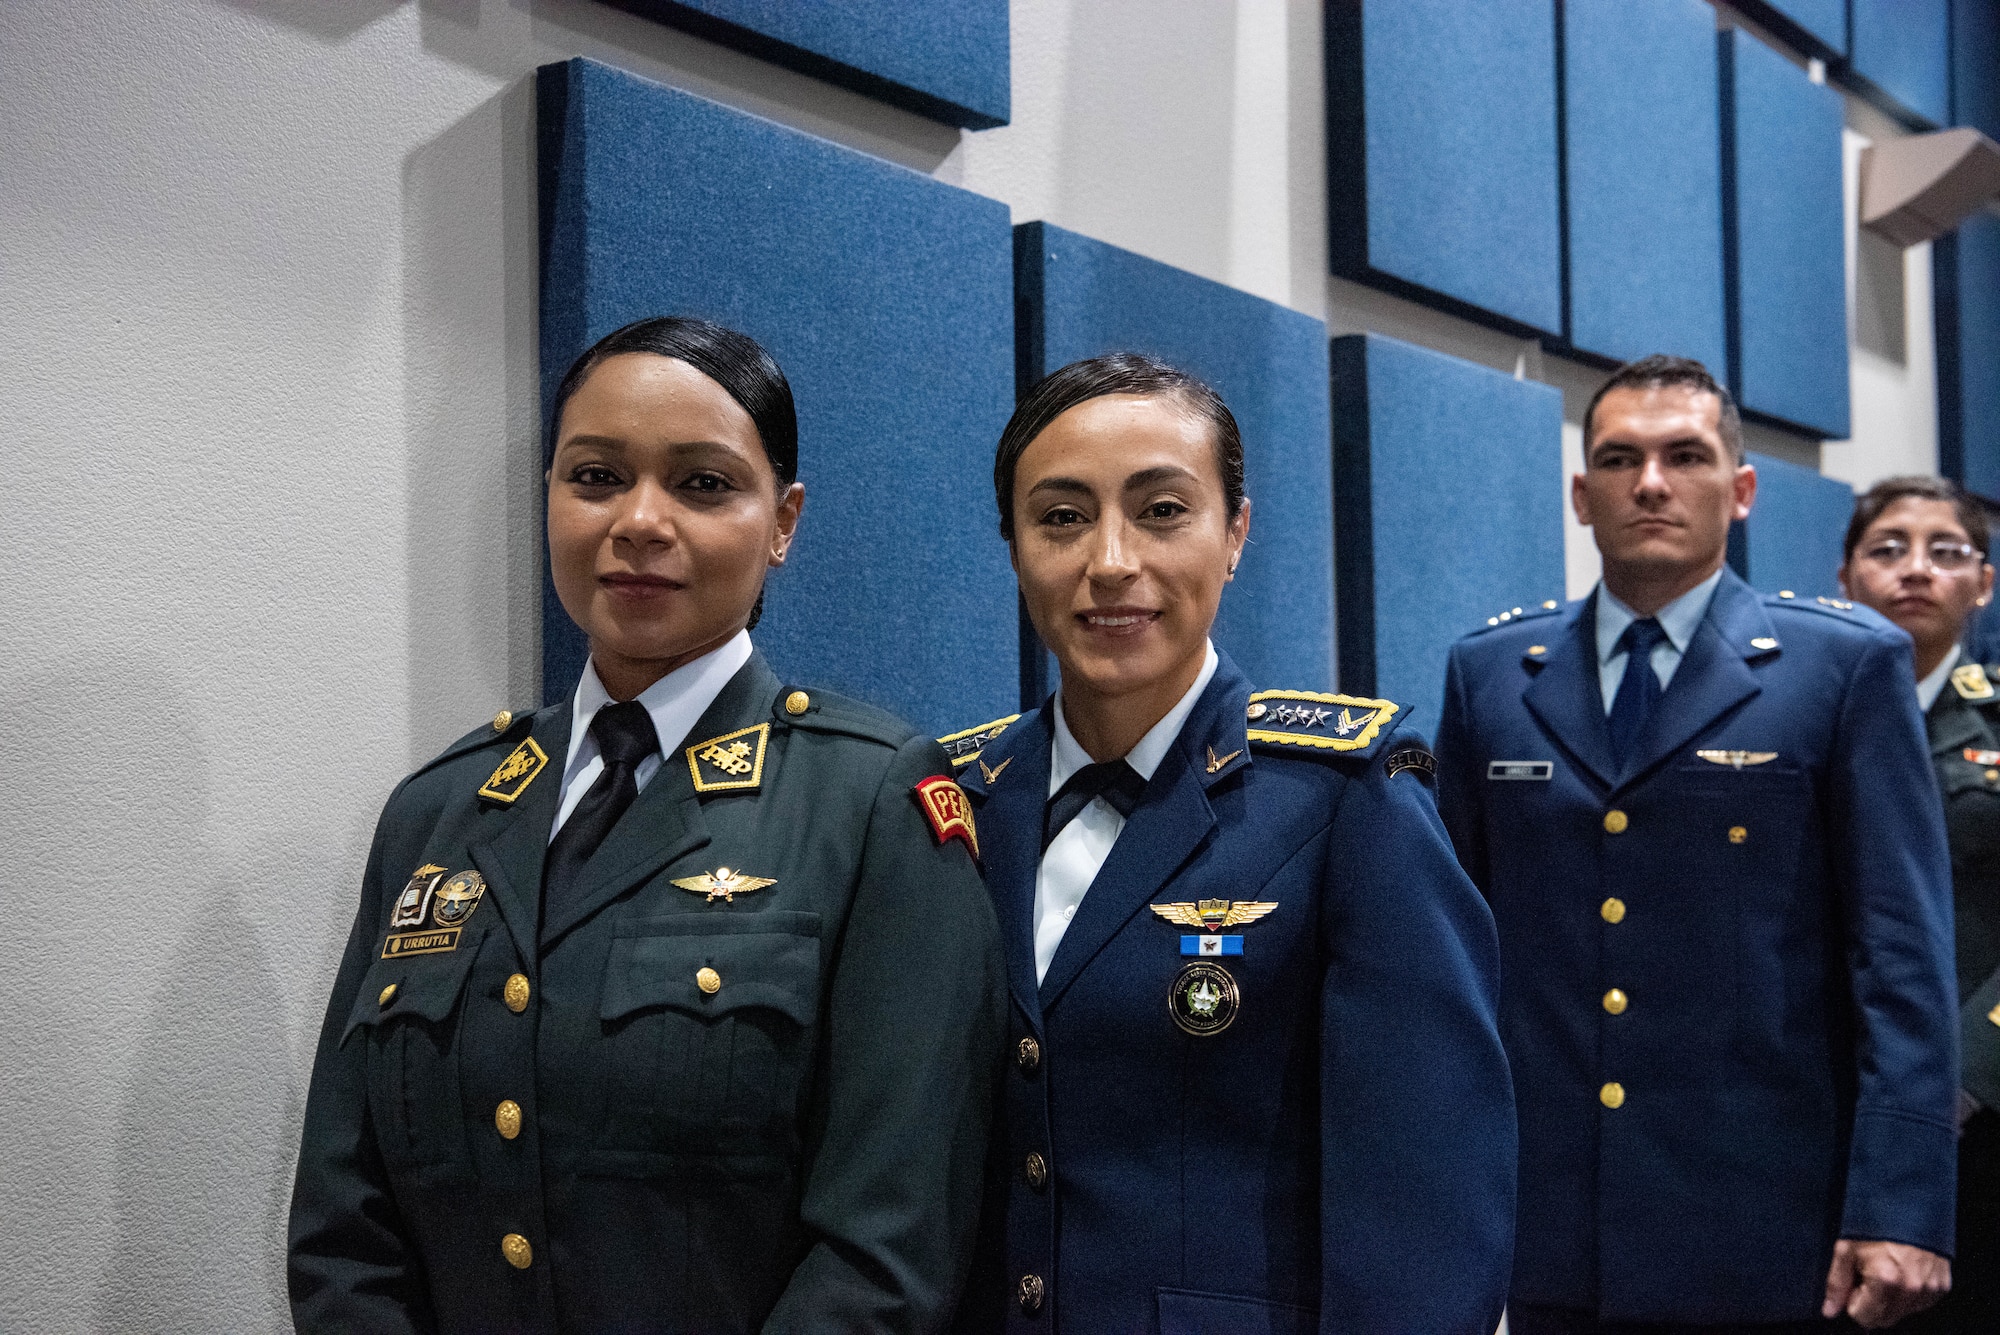 International military students smile before approaching the stage during the Inter-American Air Forces Academy’s graduation ceremony at Joint Base San Antonio-Lackland, Texas, Dec. 7, 2022. More than 150 international military students from 12 partner nations across Latin America and the USAF graduated during the last training cycle of 2022. (U.S. Air Force photo by Vanessa R. Adame)